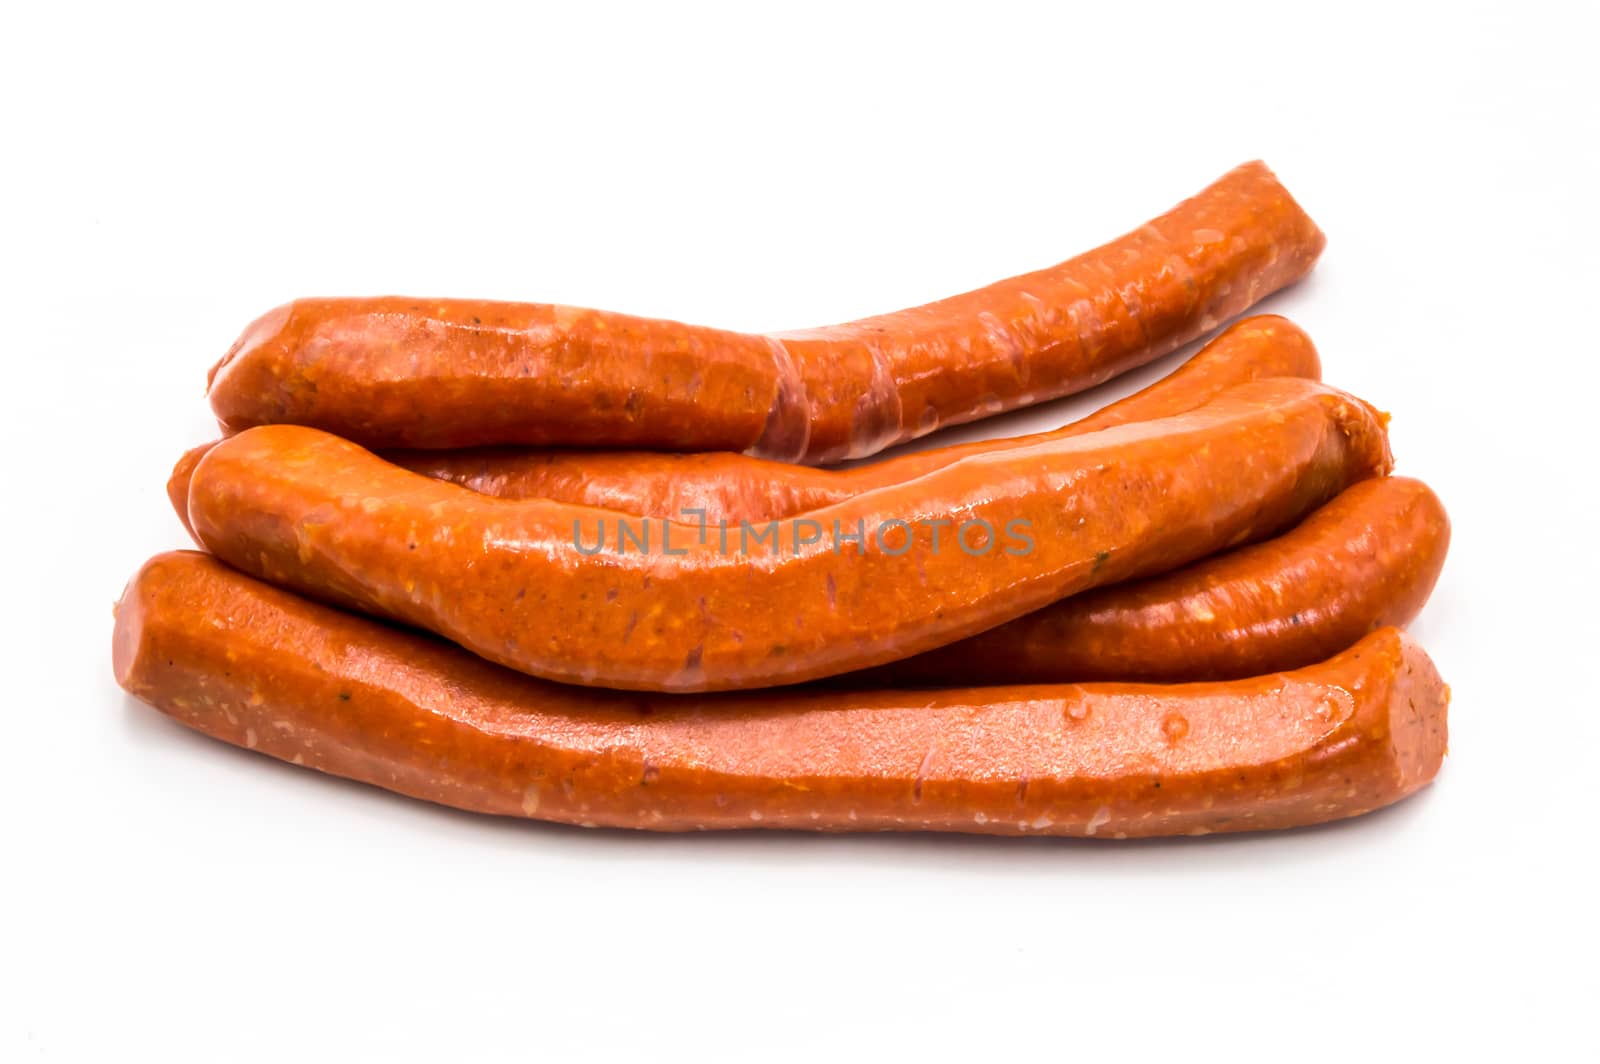 Raw Merguez on a white background by Philou1000